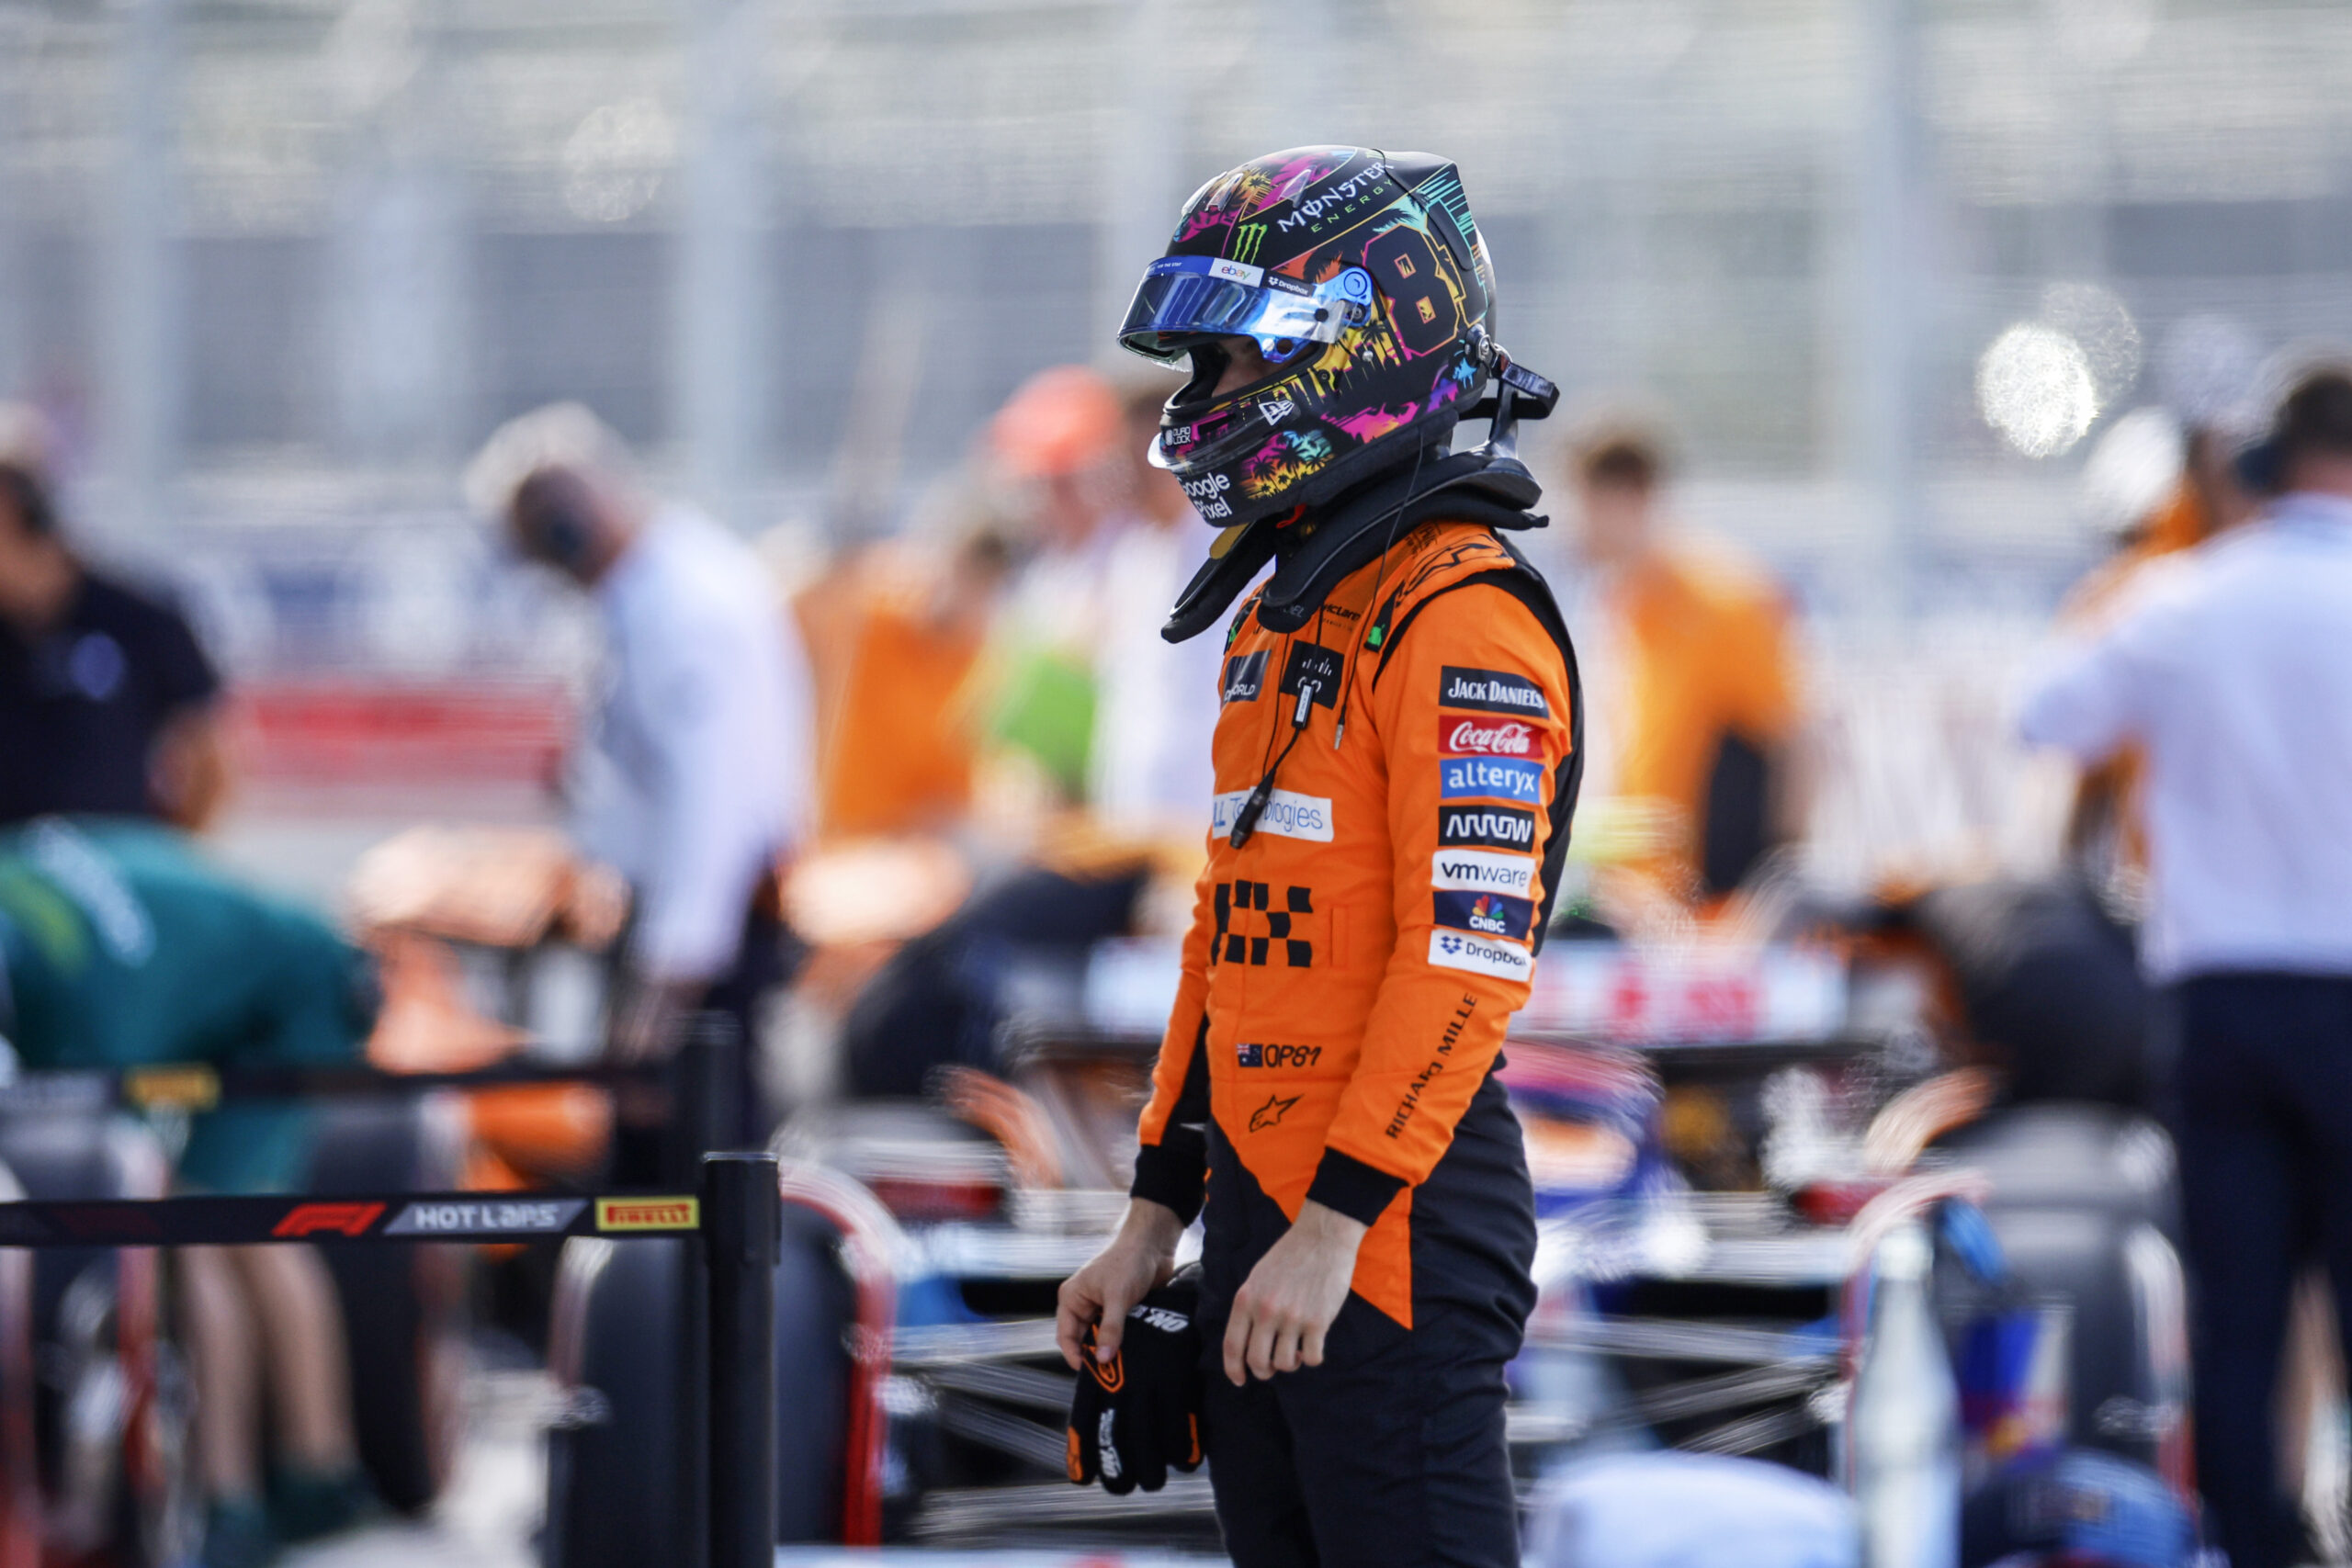 McLaren: Piastri compromised by limited upgrades in Miami